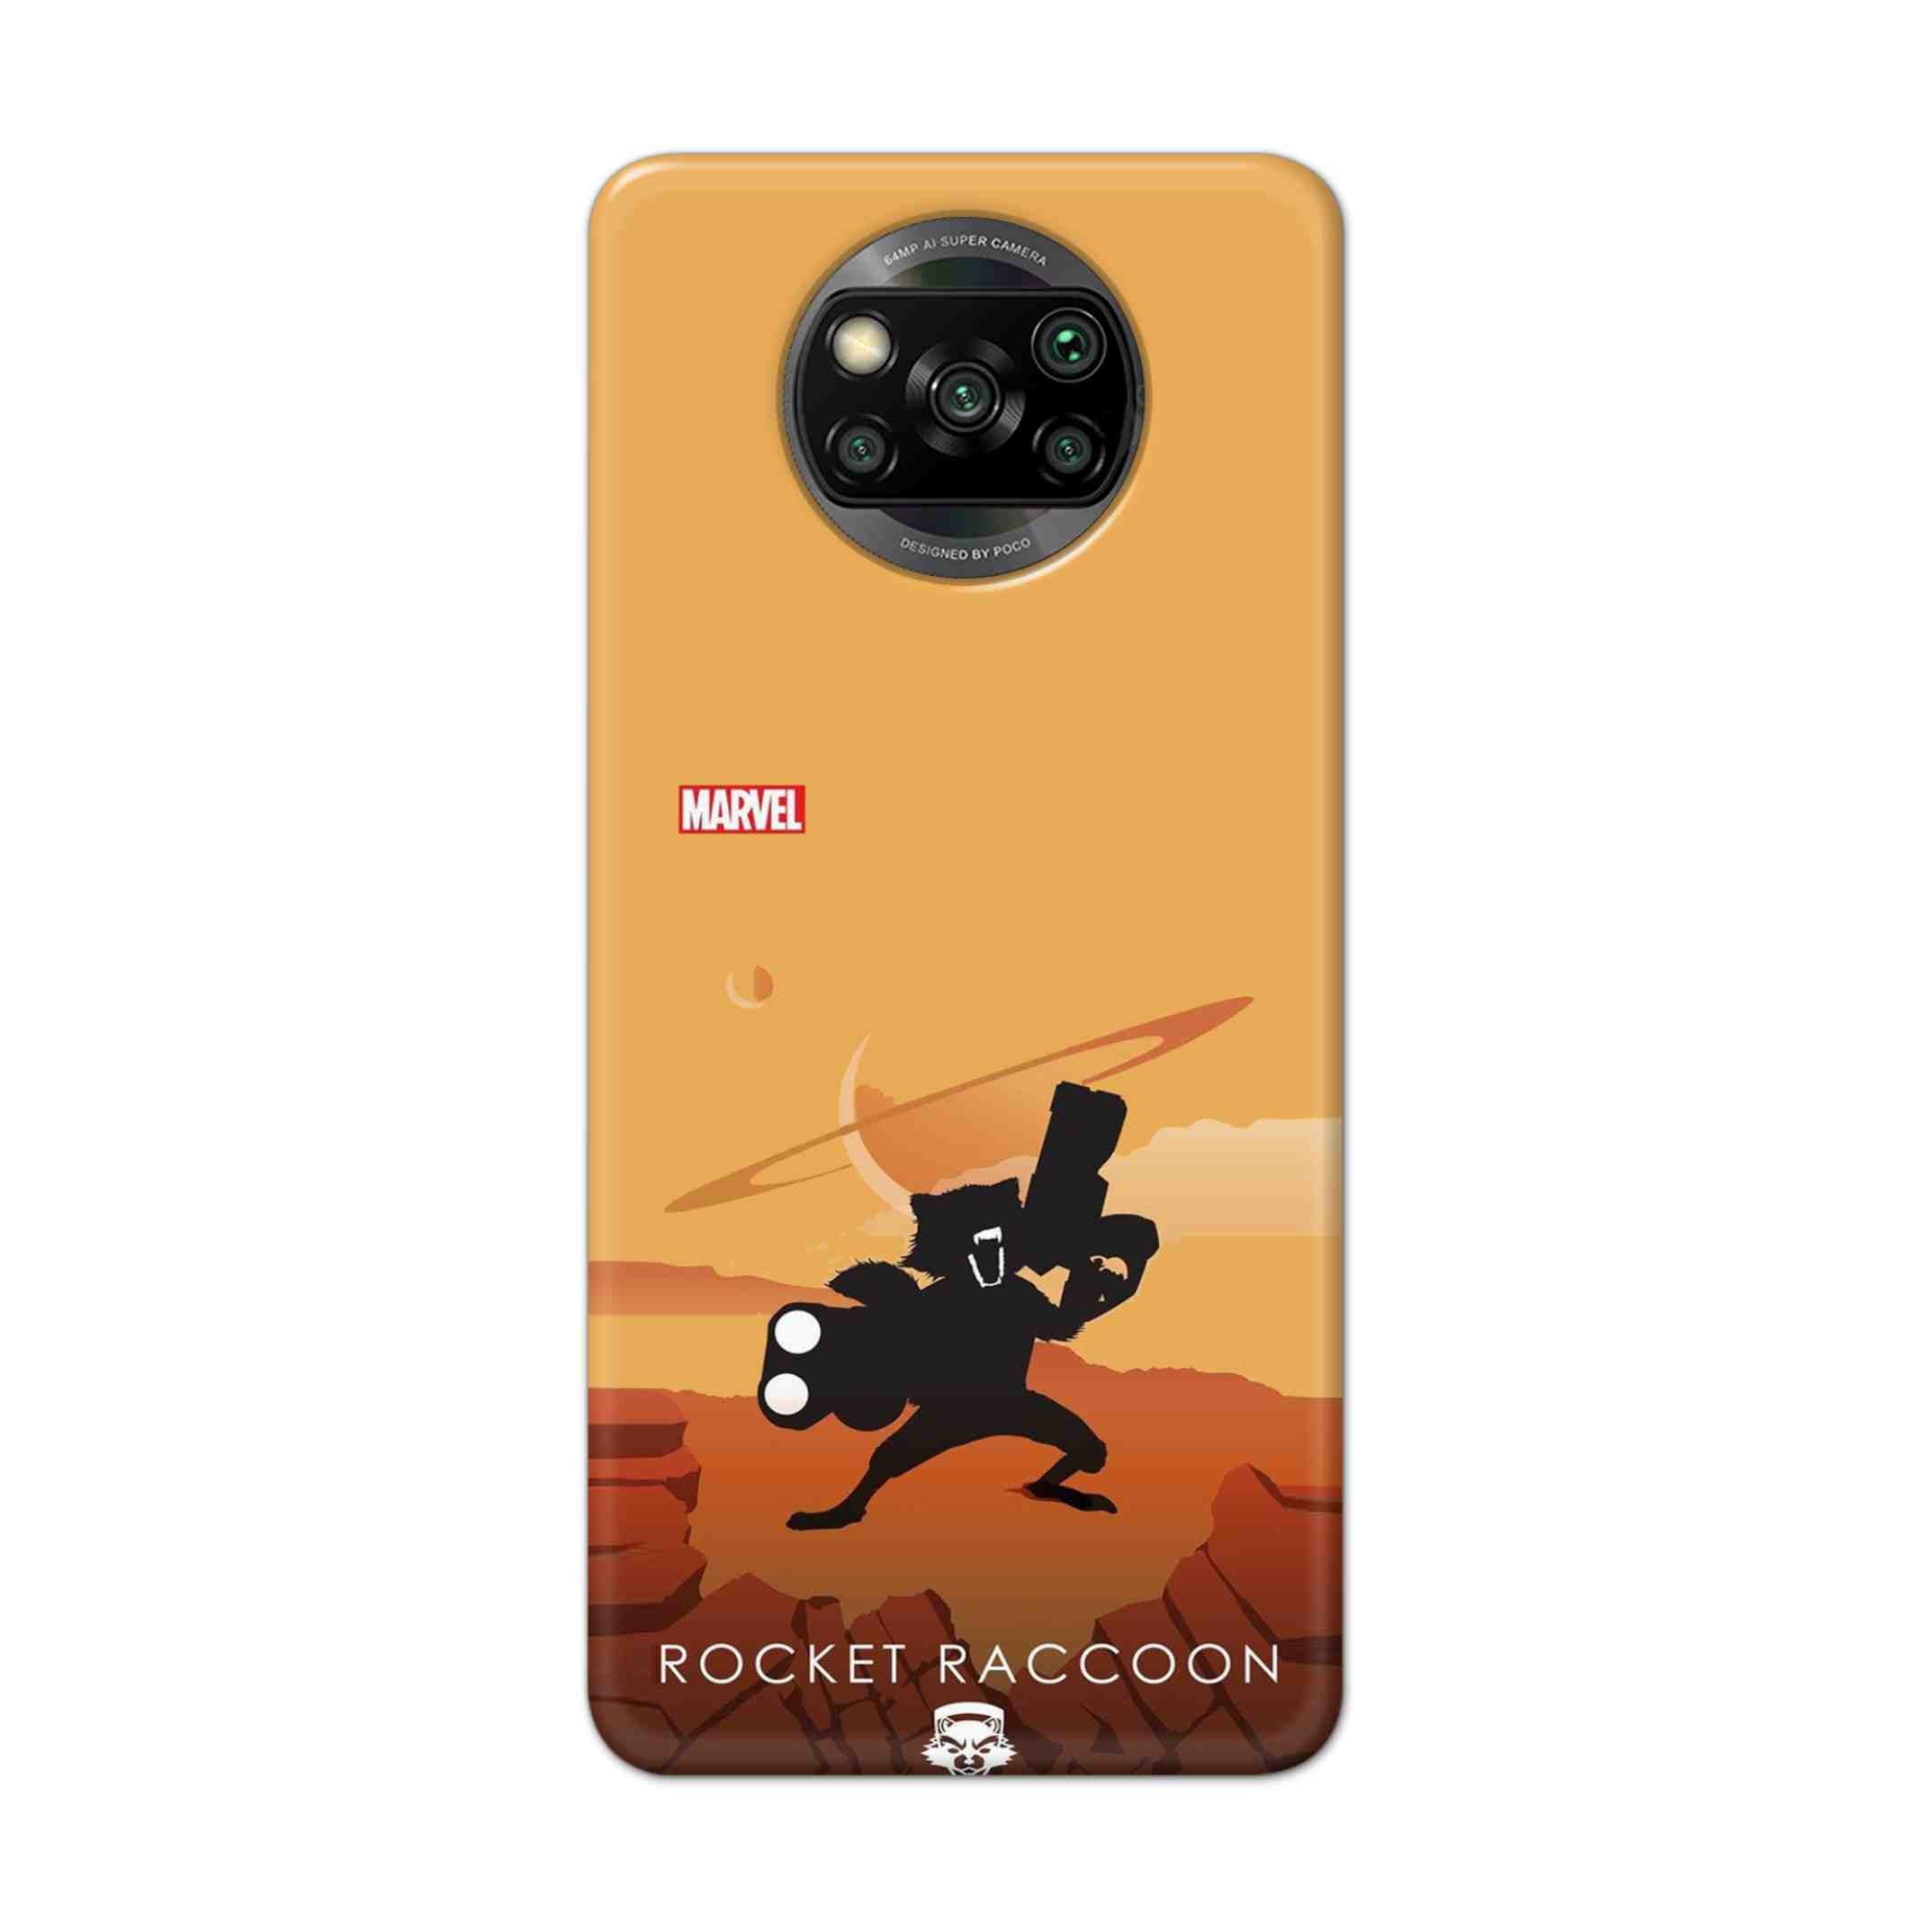 Buy Rocket Raccoon Hard Back Mobile Phone Case Cover For Pcoc X3 NFC Online